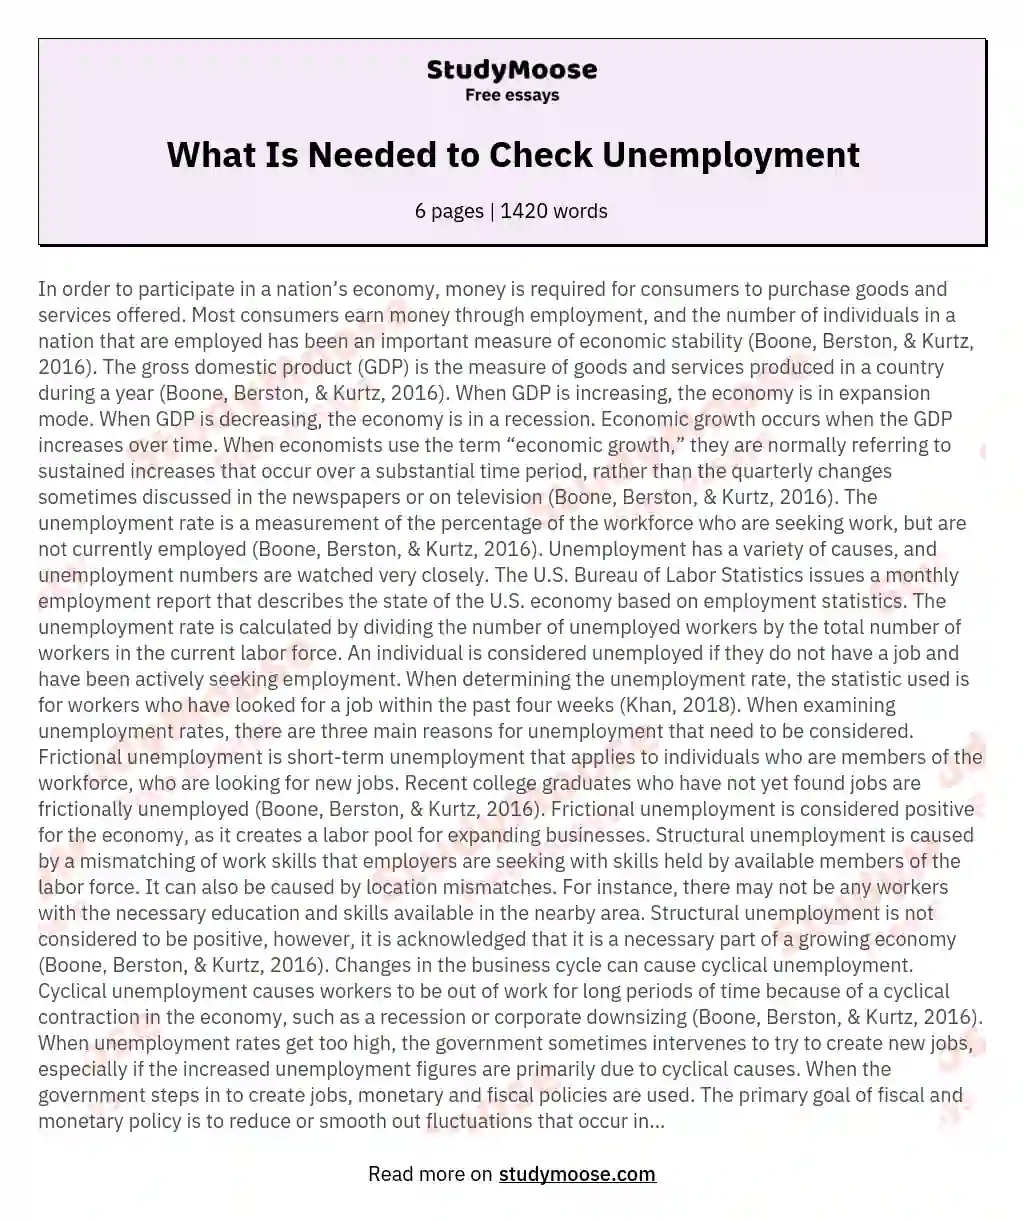 What Is Needed to Check Unemployment essay